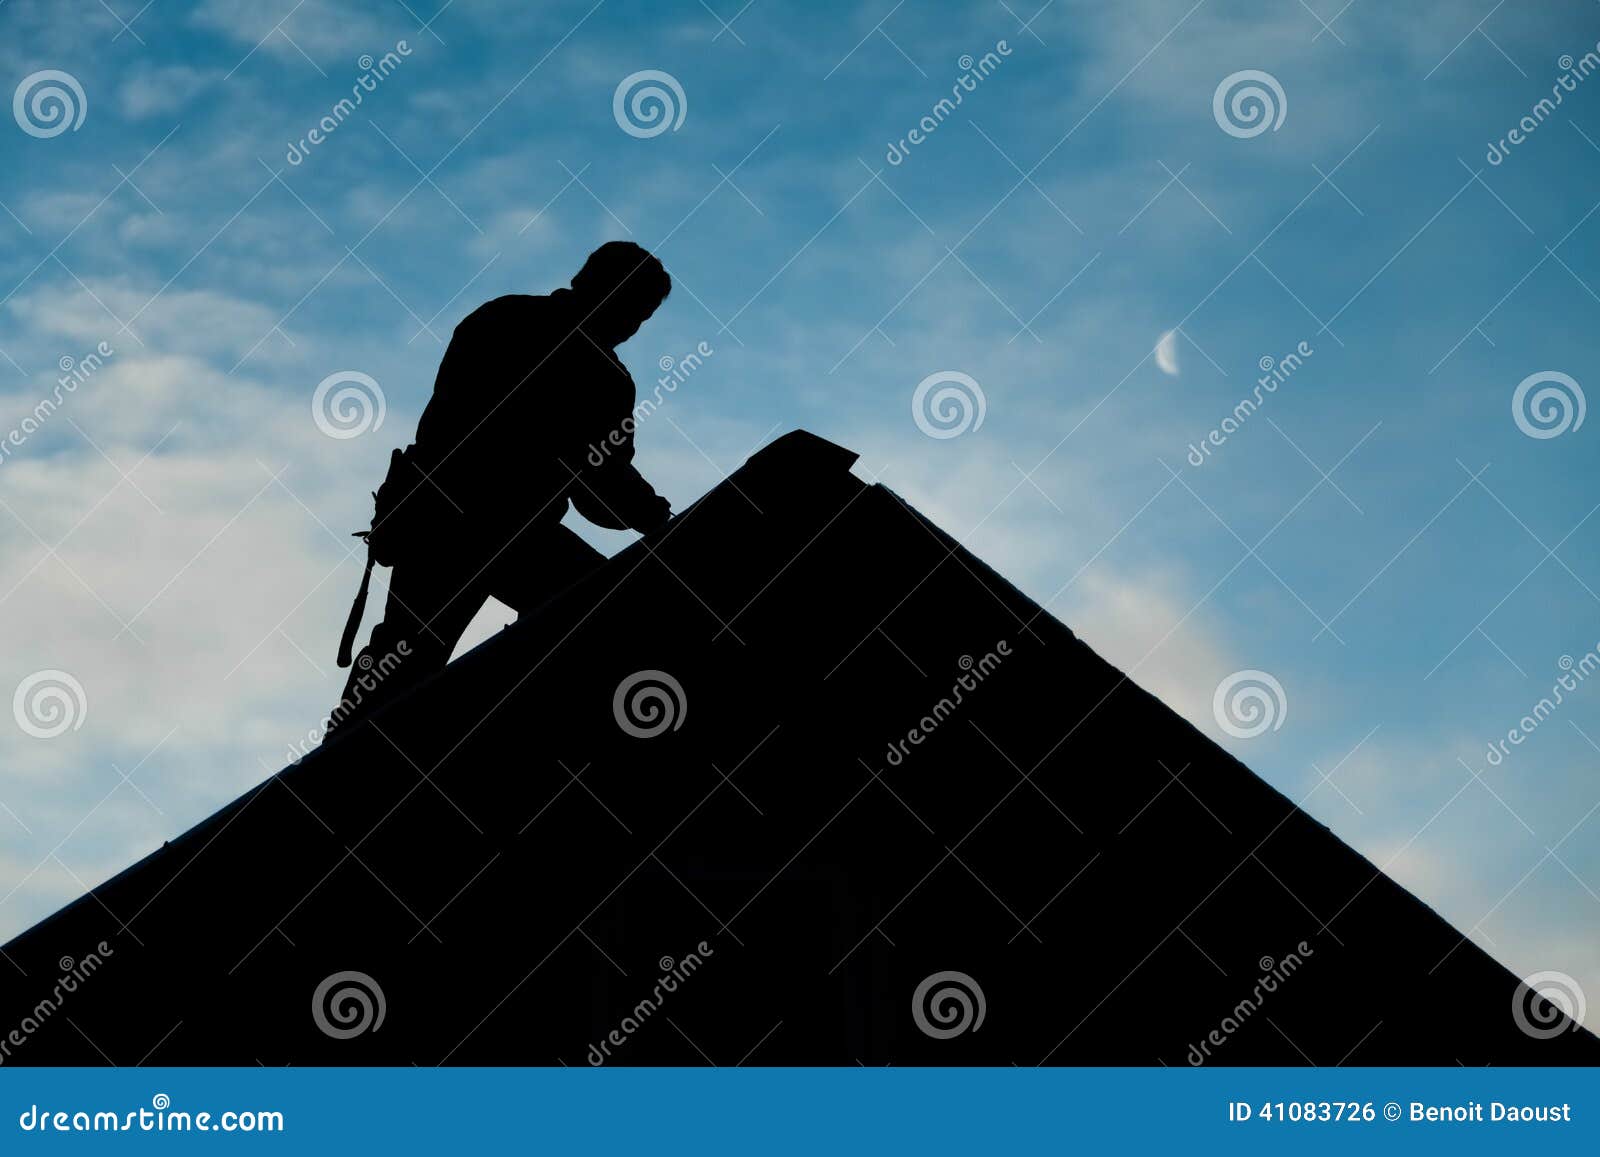 contractor in silhouette working on a roof top